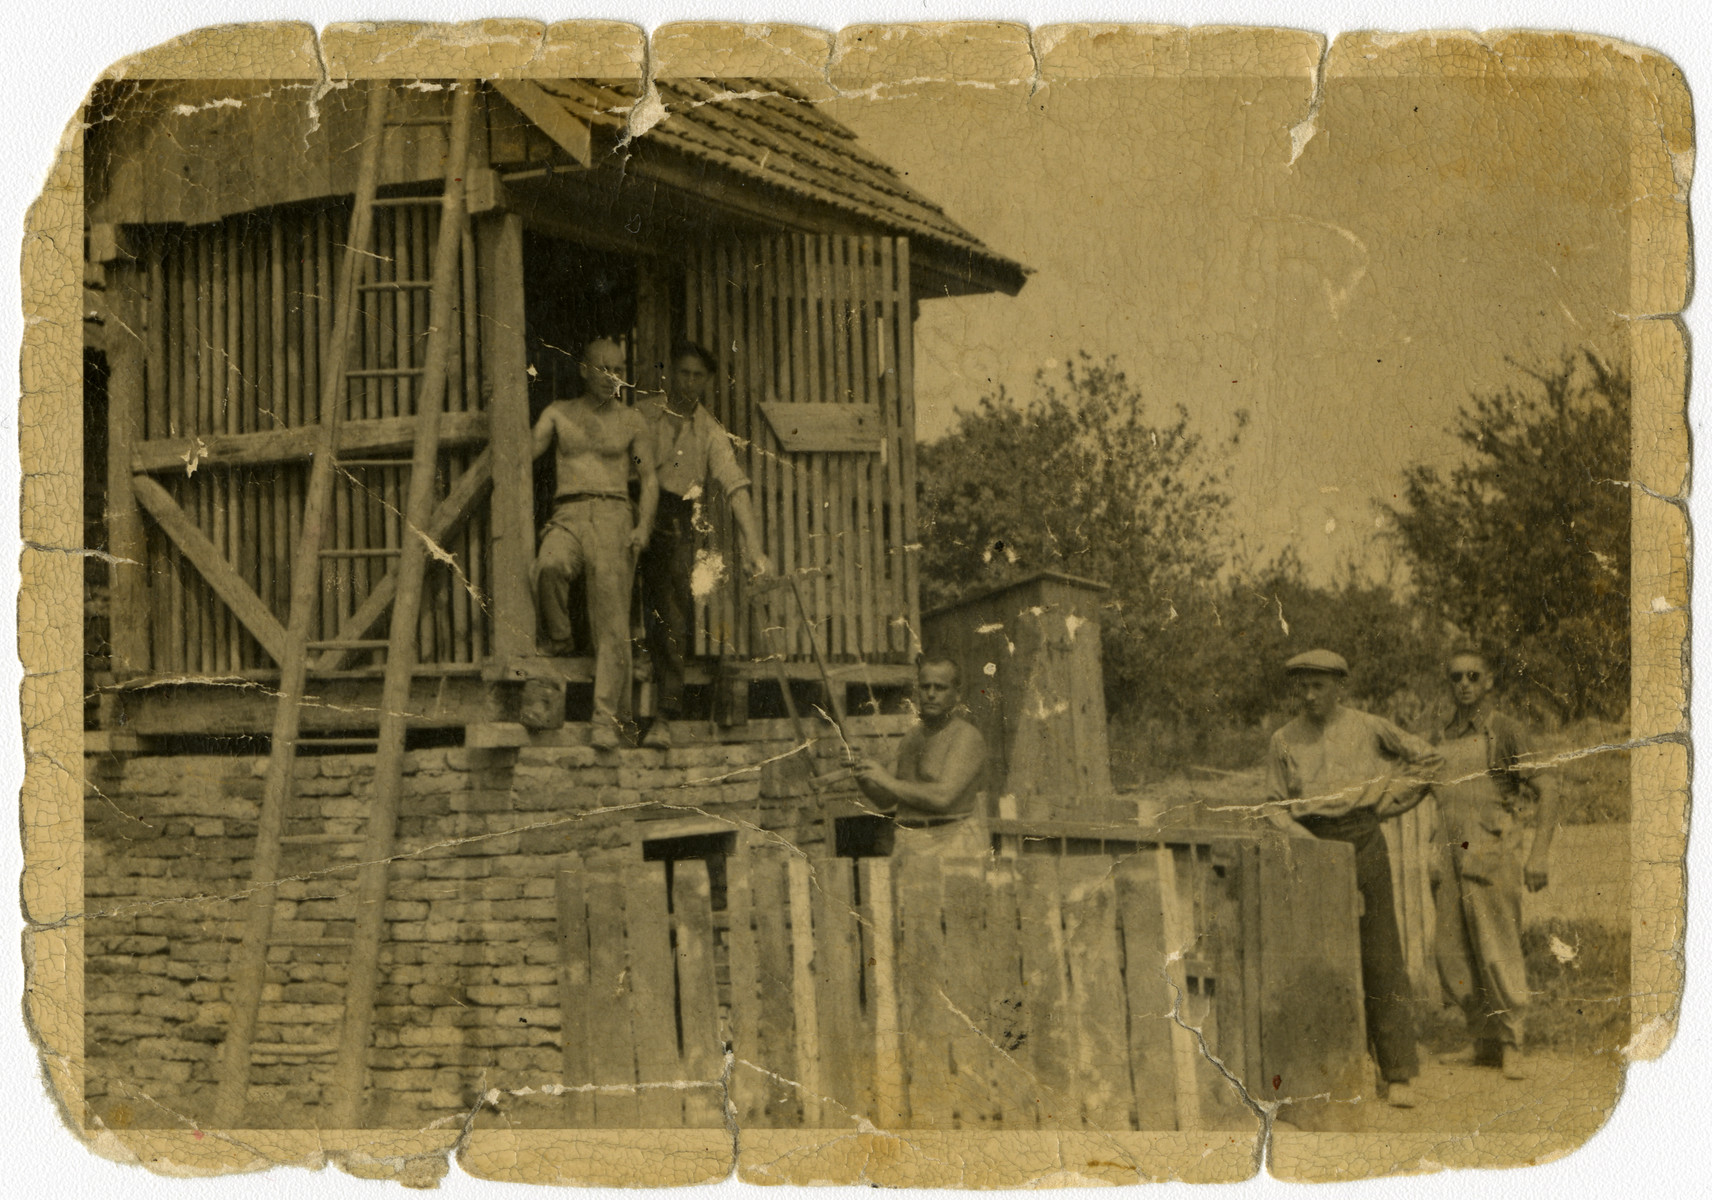 Serbian Jews are forced to work on a construction project.

Daniel Ripp is pictured in the structure on the right.